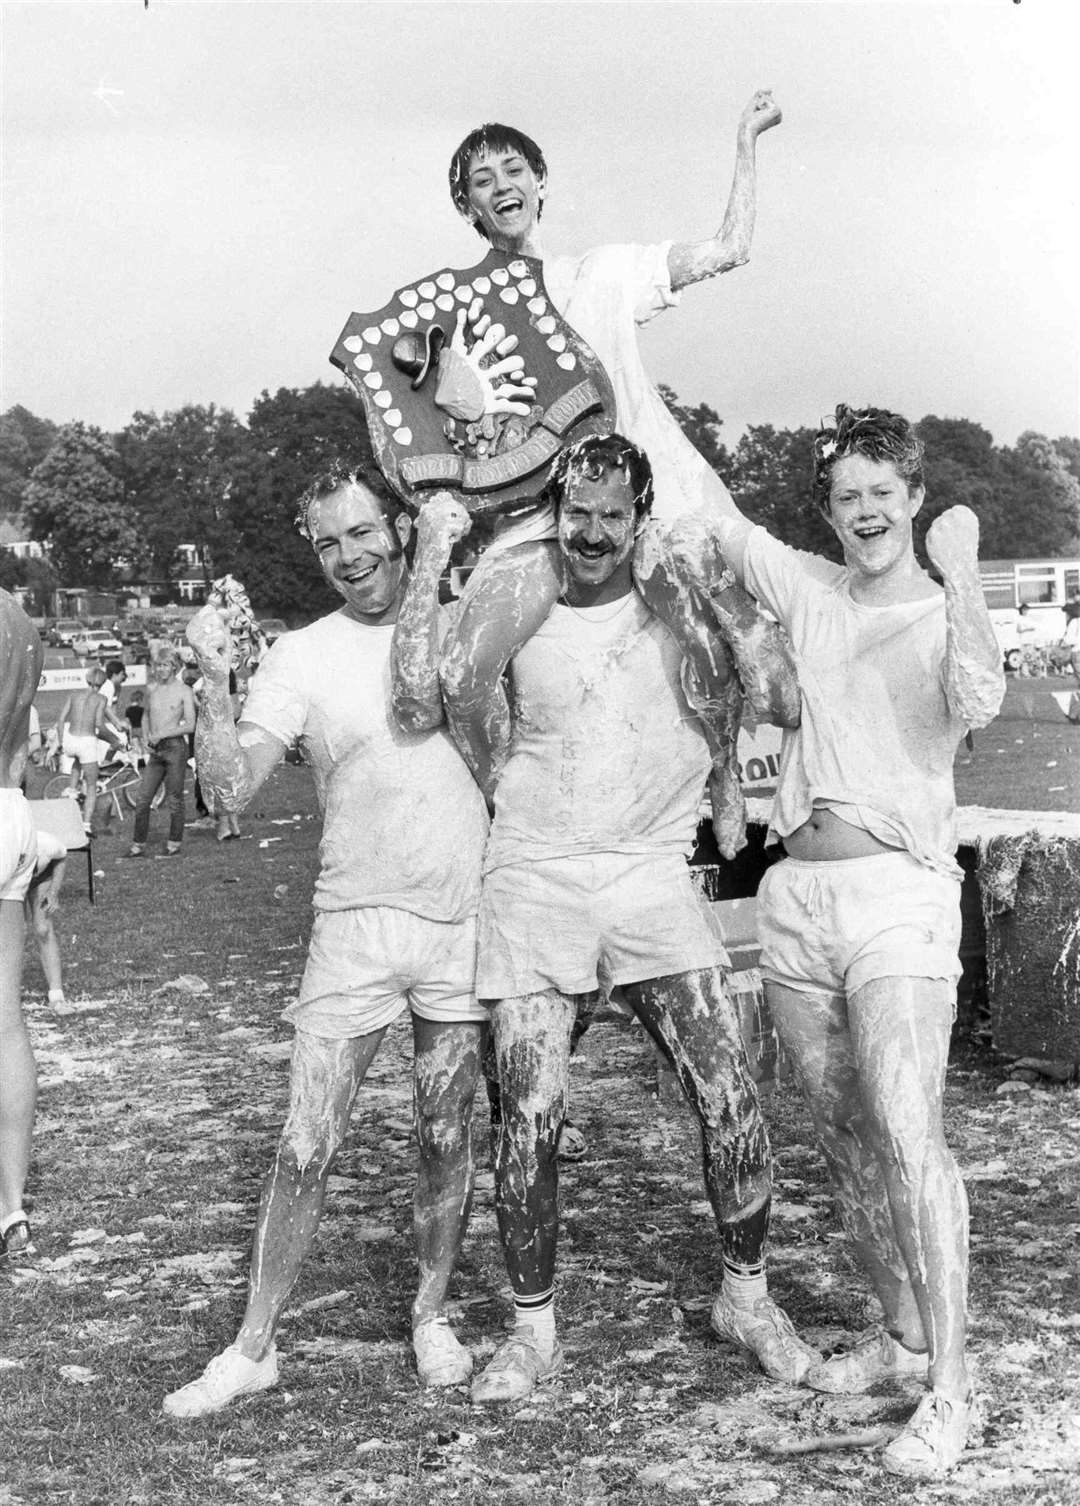 The Mudslingers were victorious in the Custard Pie Championships near Maidstone in July 1983